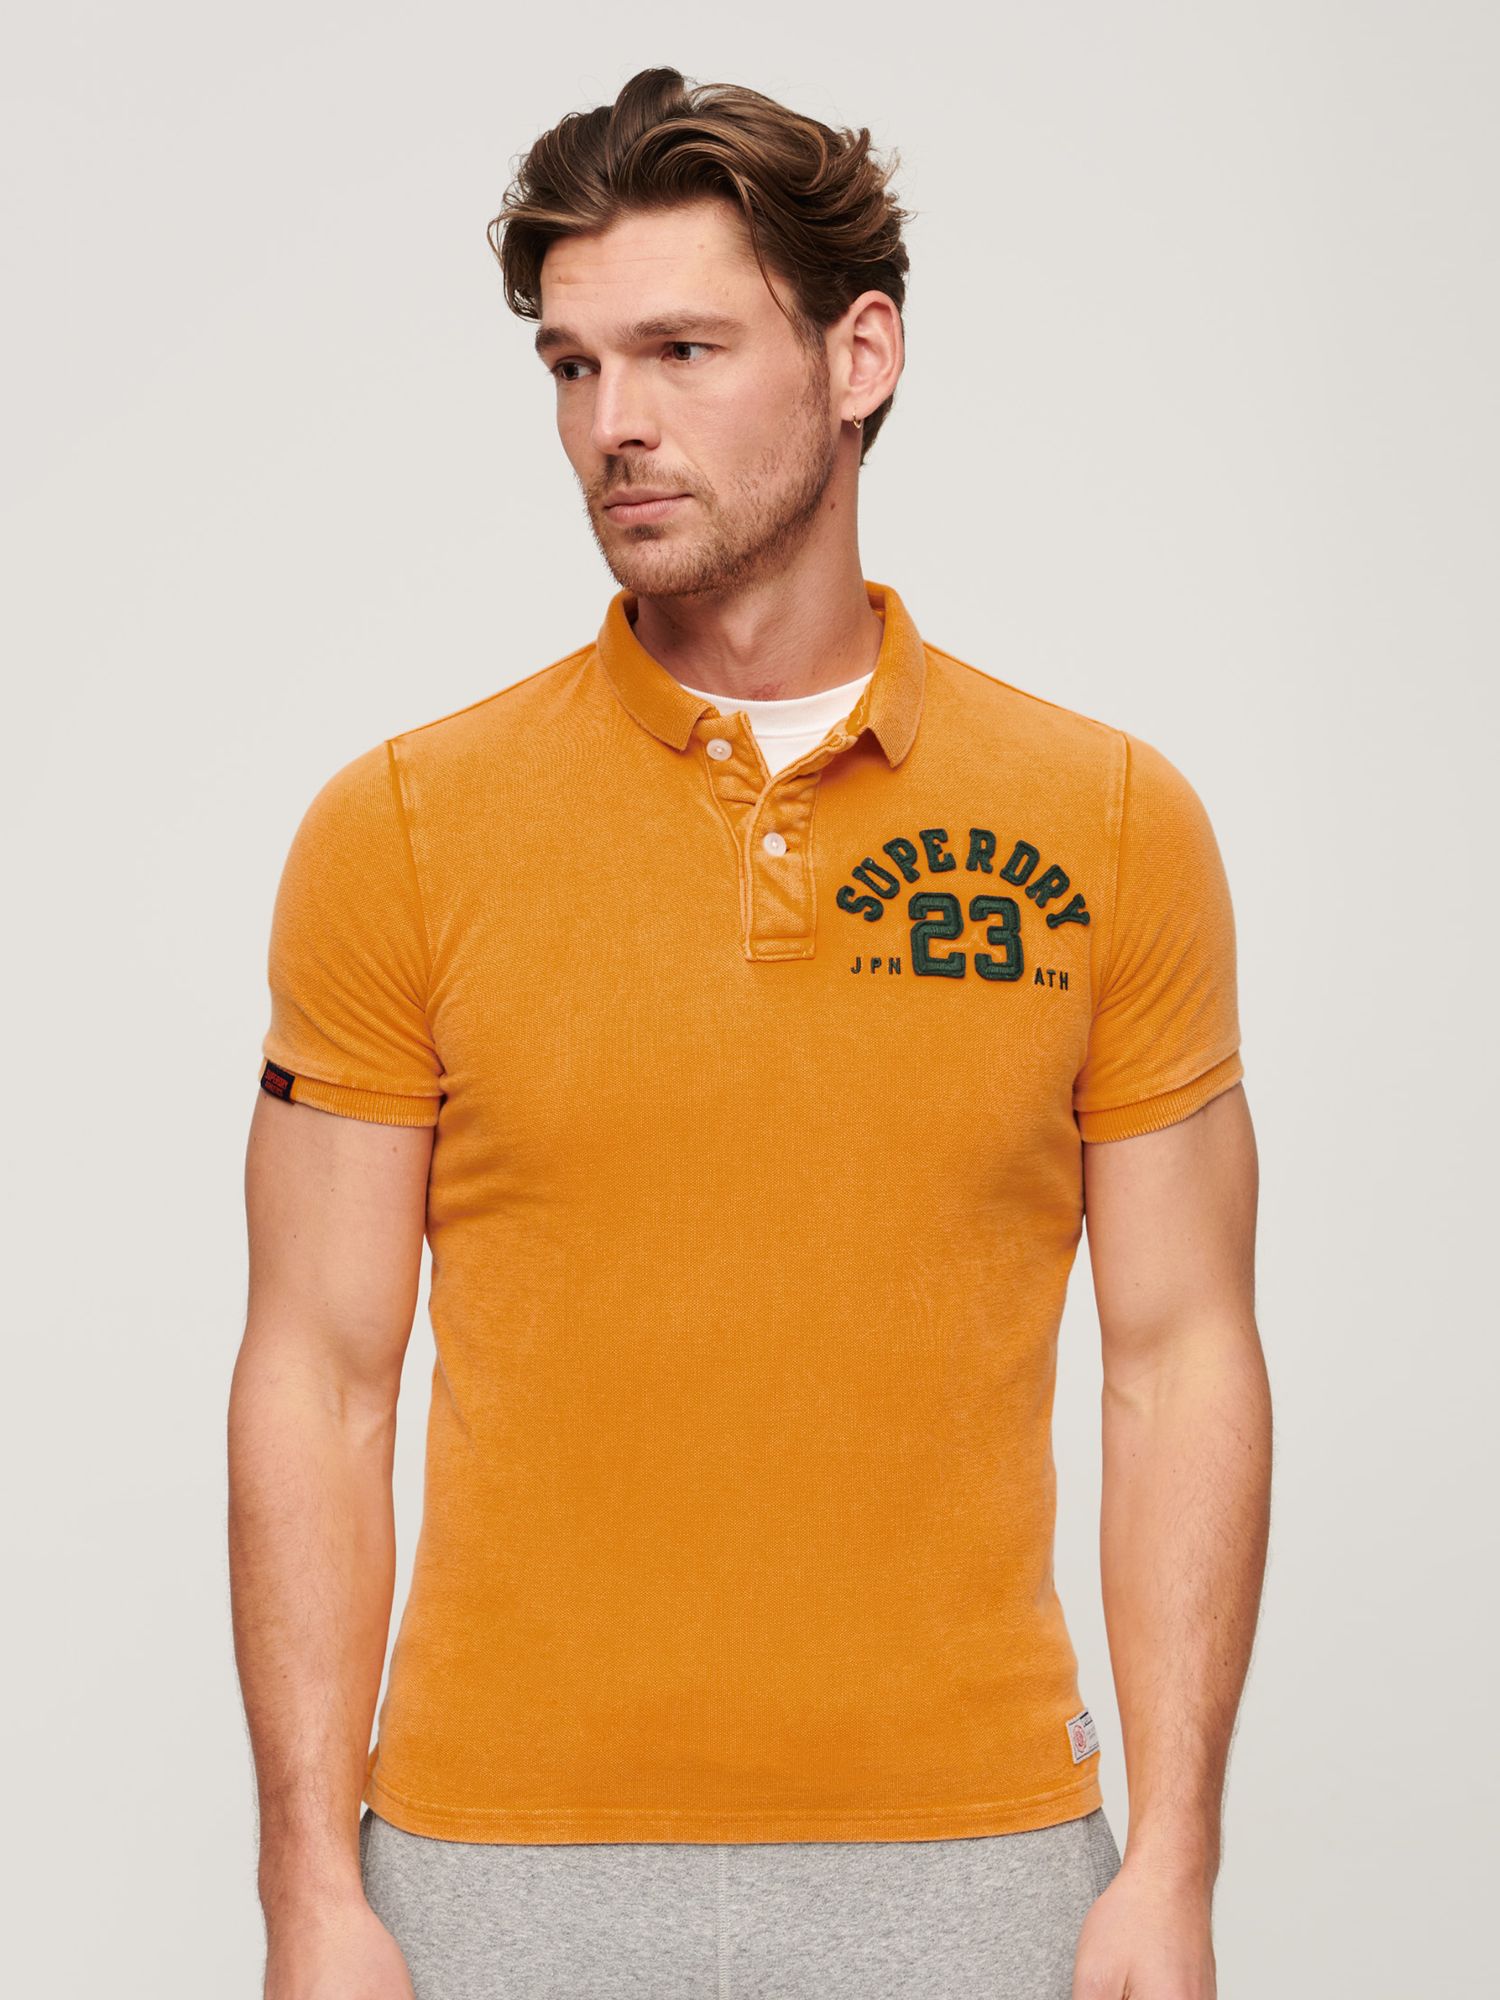 Superdry Vintage Athletic Polo Shirt, Track Gold, S